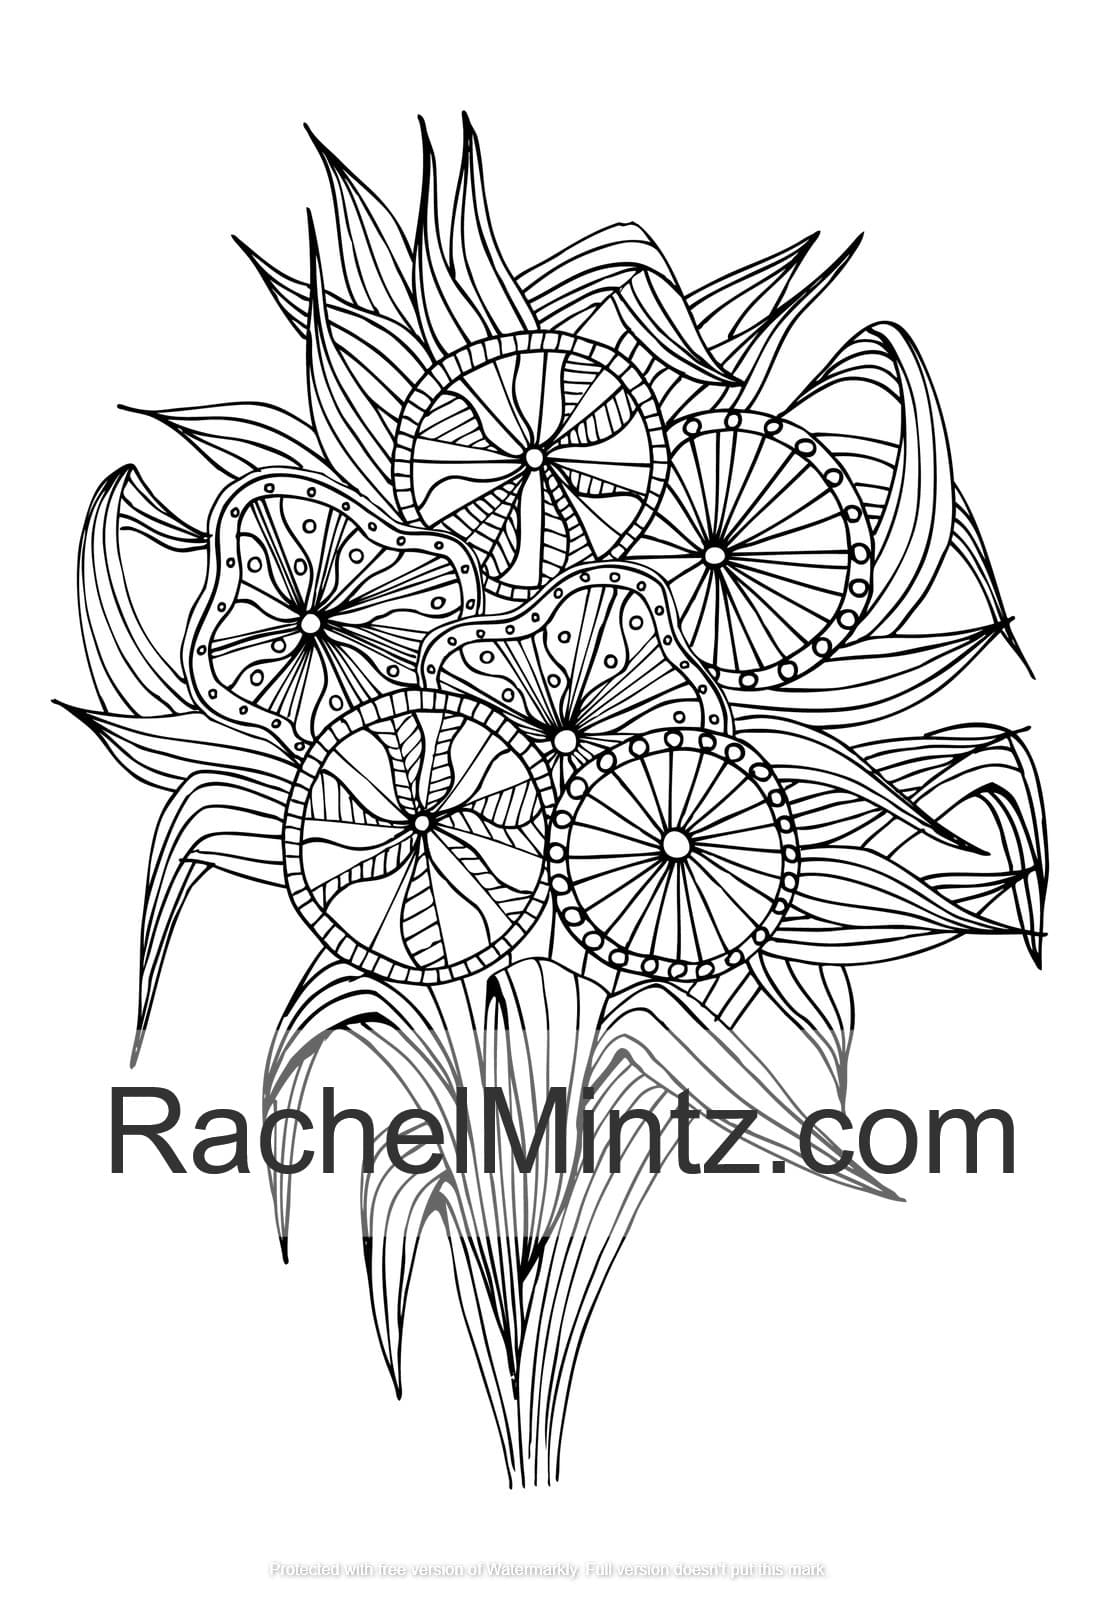 My Flowers Bouquet Coloring Book - Vases & Pots With Beautiful Summer Flowers For Relaxation (PDF Book)